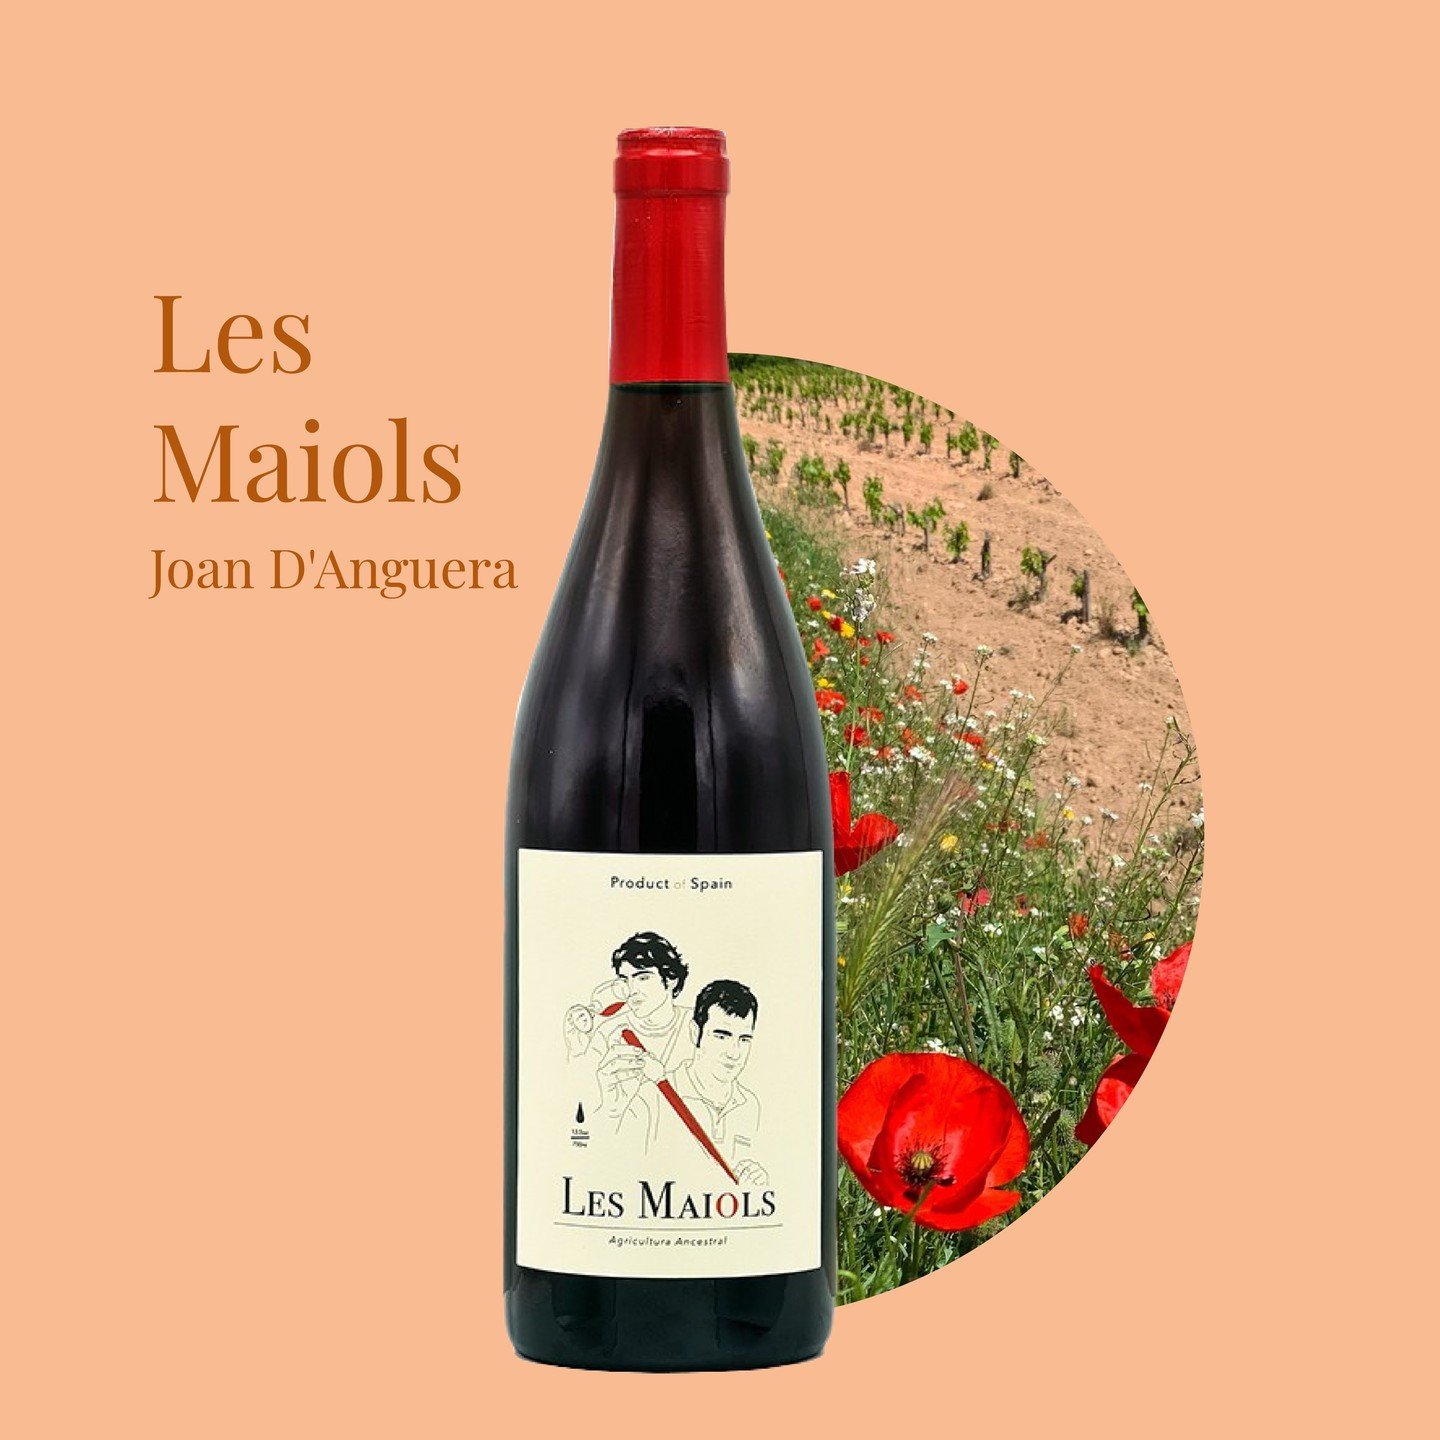 Our happy hour selection!

Les Maiols, easy drinking red, full of fresh fruits, vibrant marmalade notes with bright acidity and tension. 

Winemaker: Joan D&rsquo;Anguera 
Origin: Montsant, Spain.

#happyhour #nyc #Happyhournyc #smallestate #spanishw